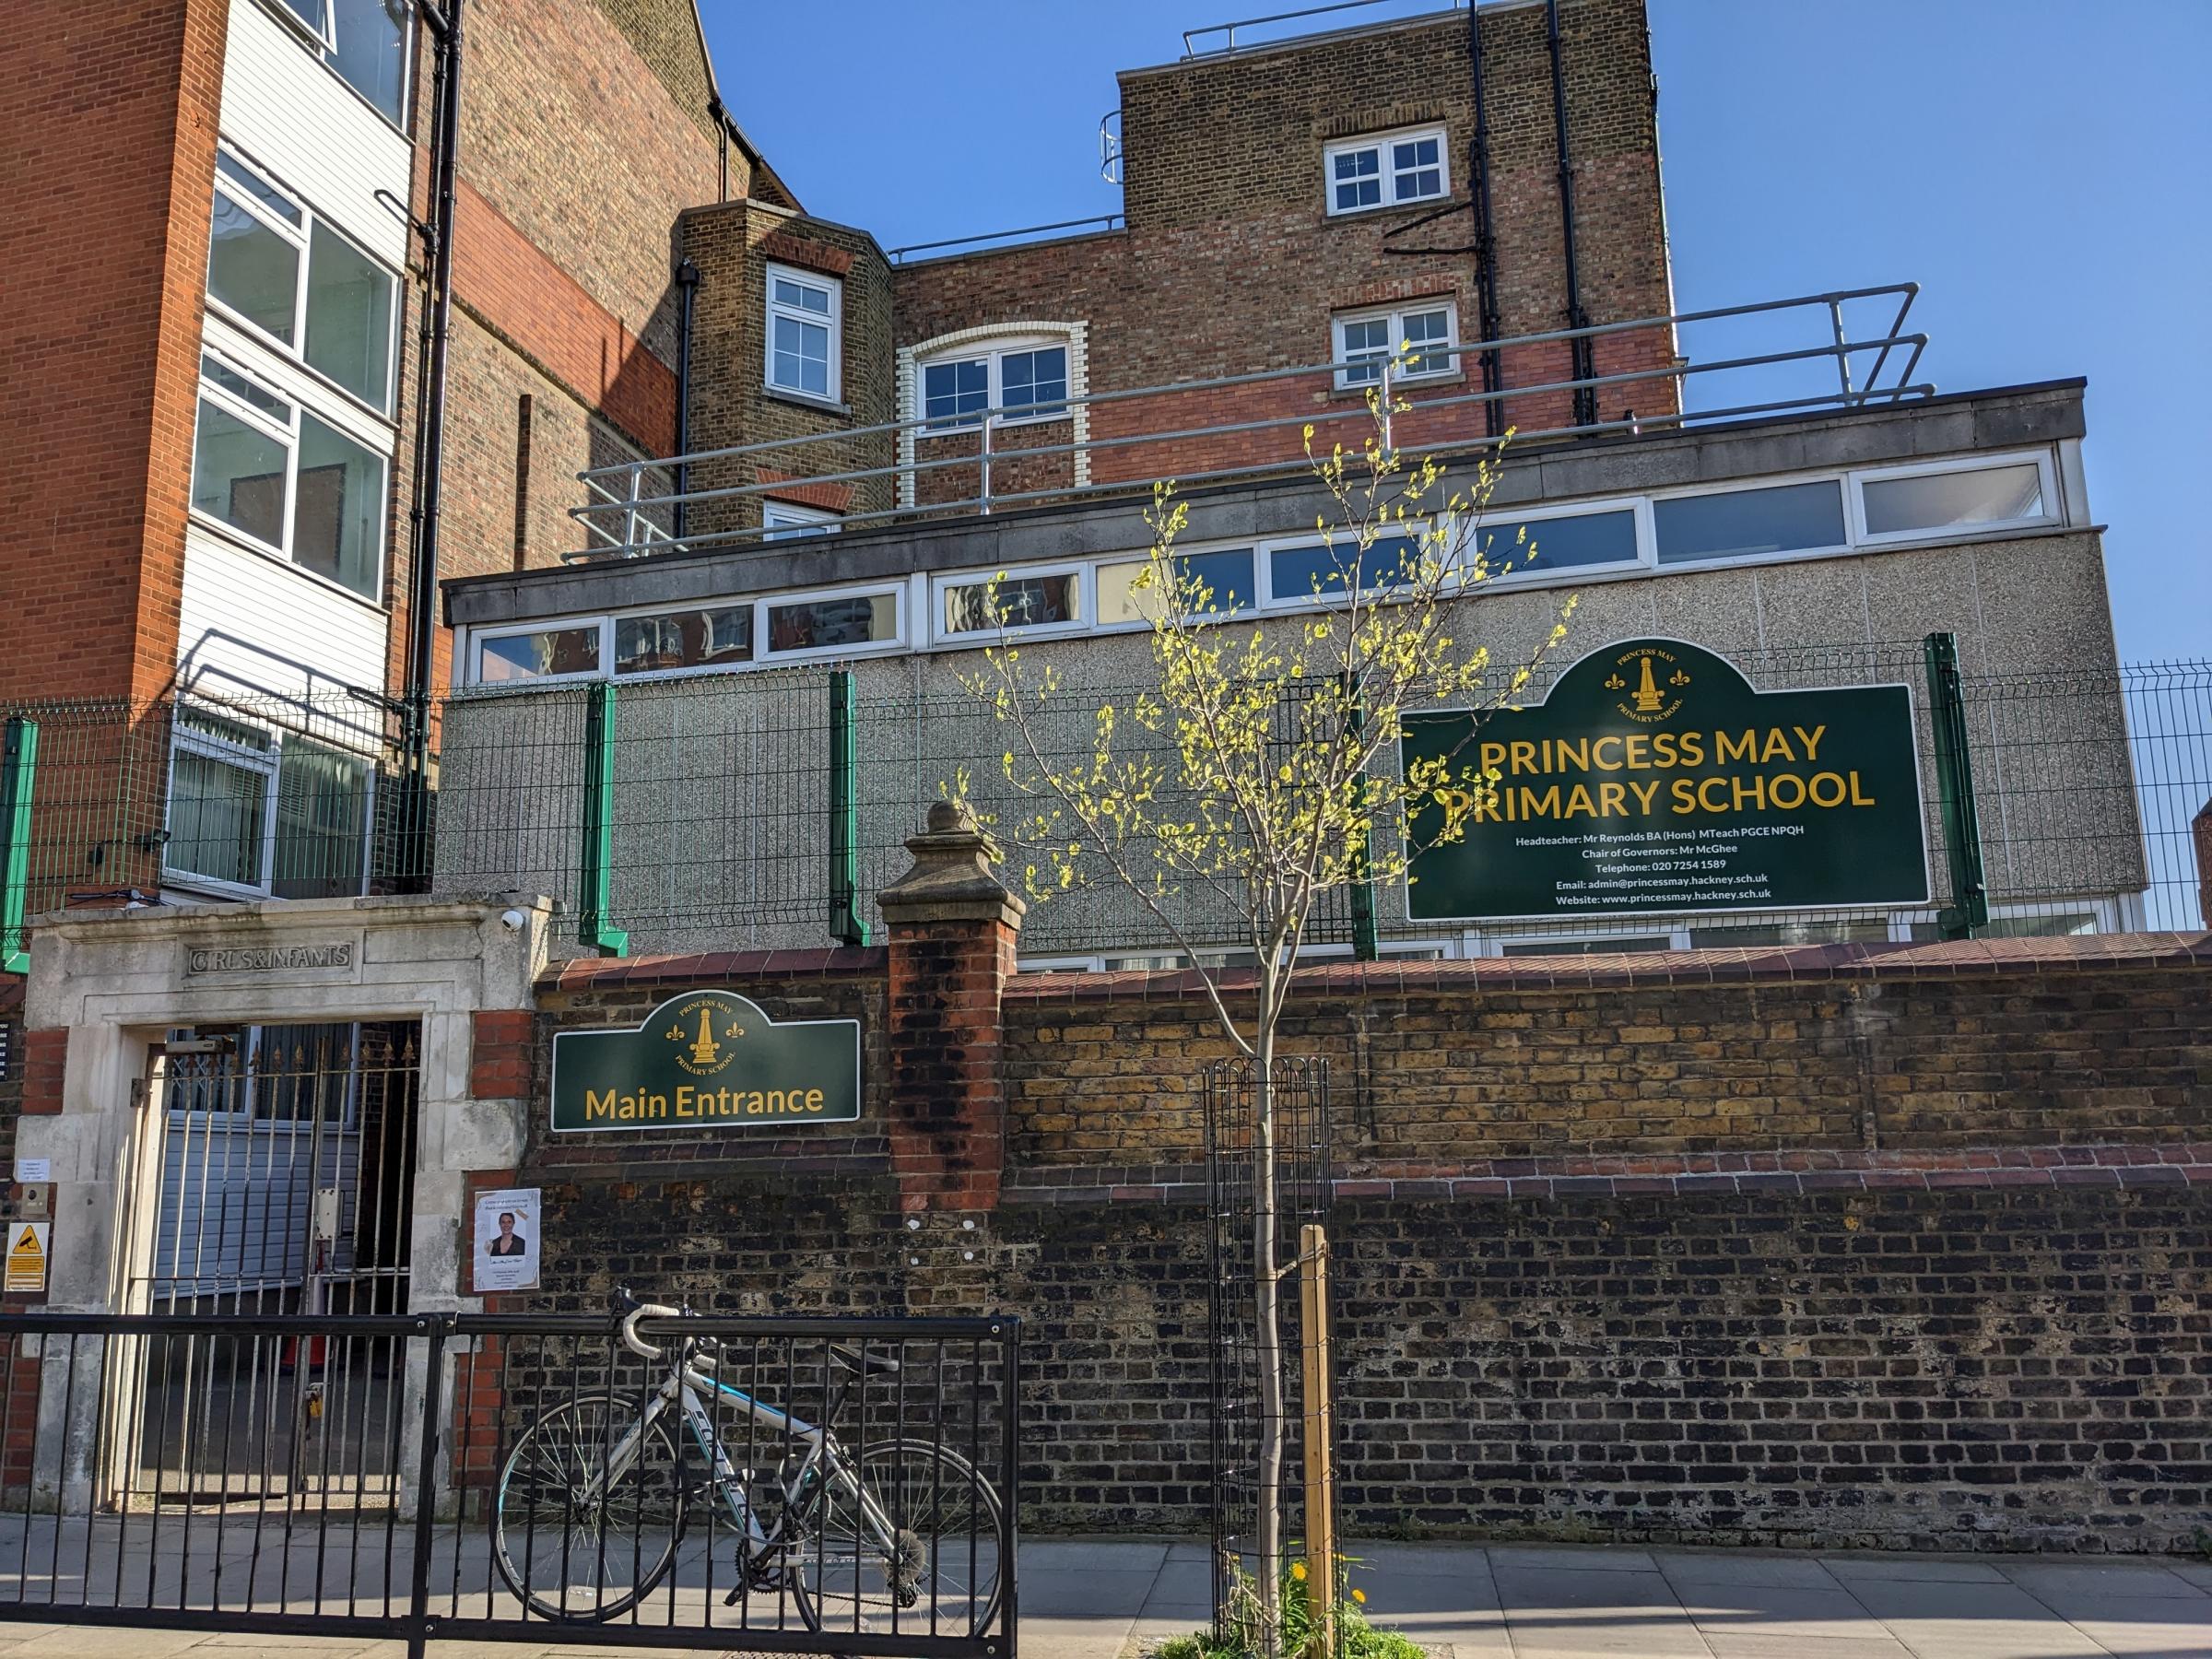 Princess May primary school , Hackney. Because of falling school rolls Colvestone primary could merge and move to this school. Pic Julia Gregory, free for use by partners of BBC news wire service